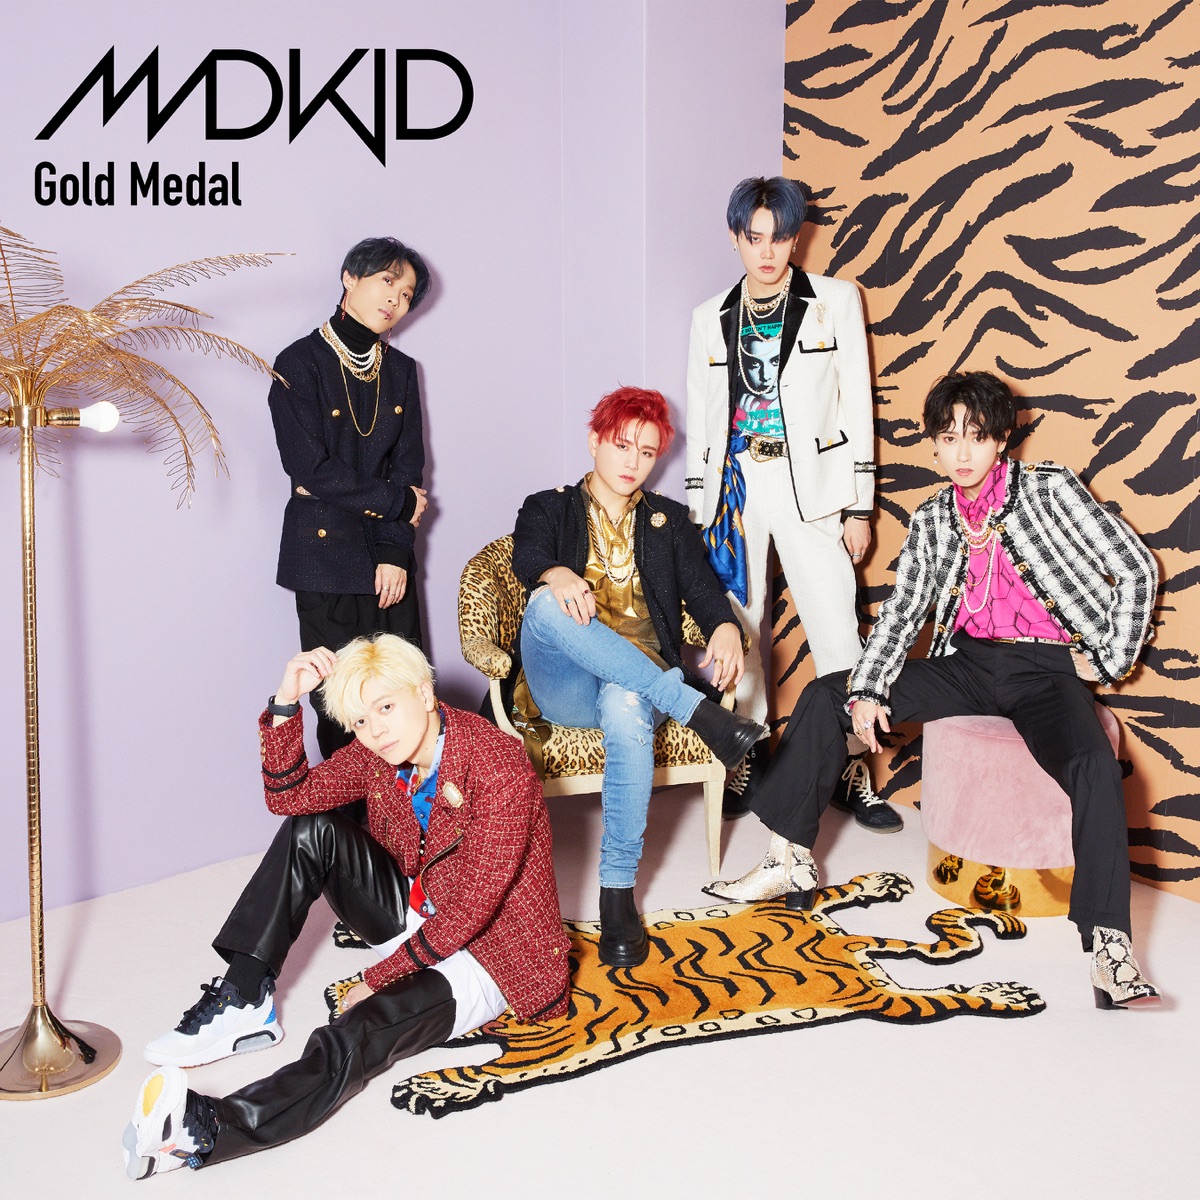 Cover for『MADKID - Gold Medal』from the release『Gold Medal』